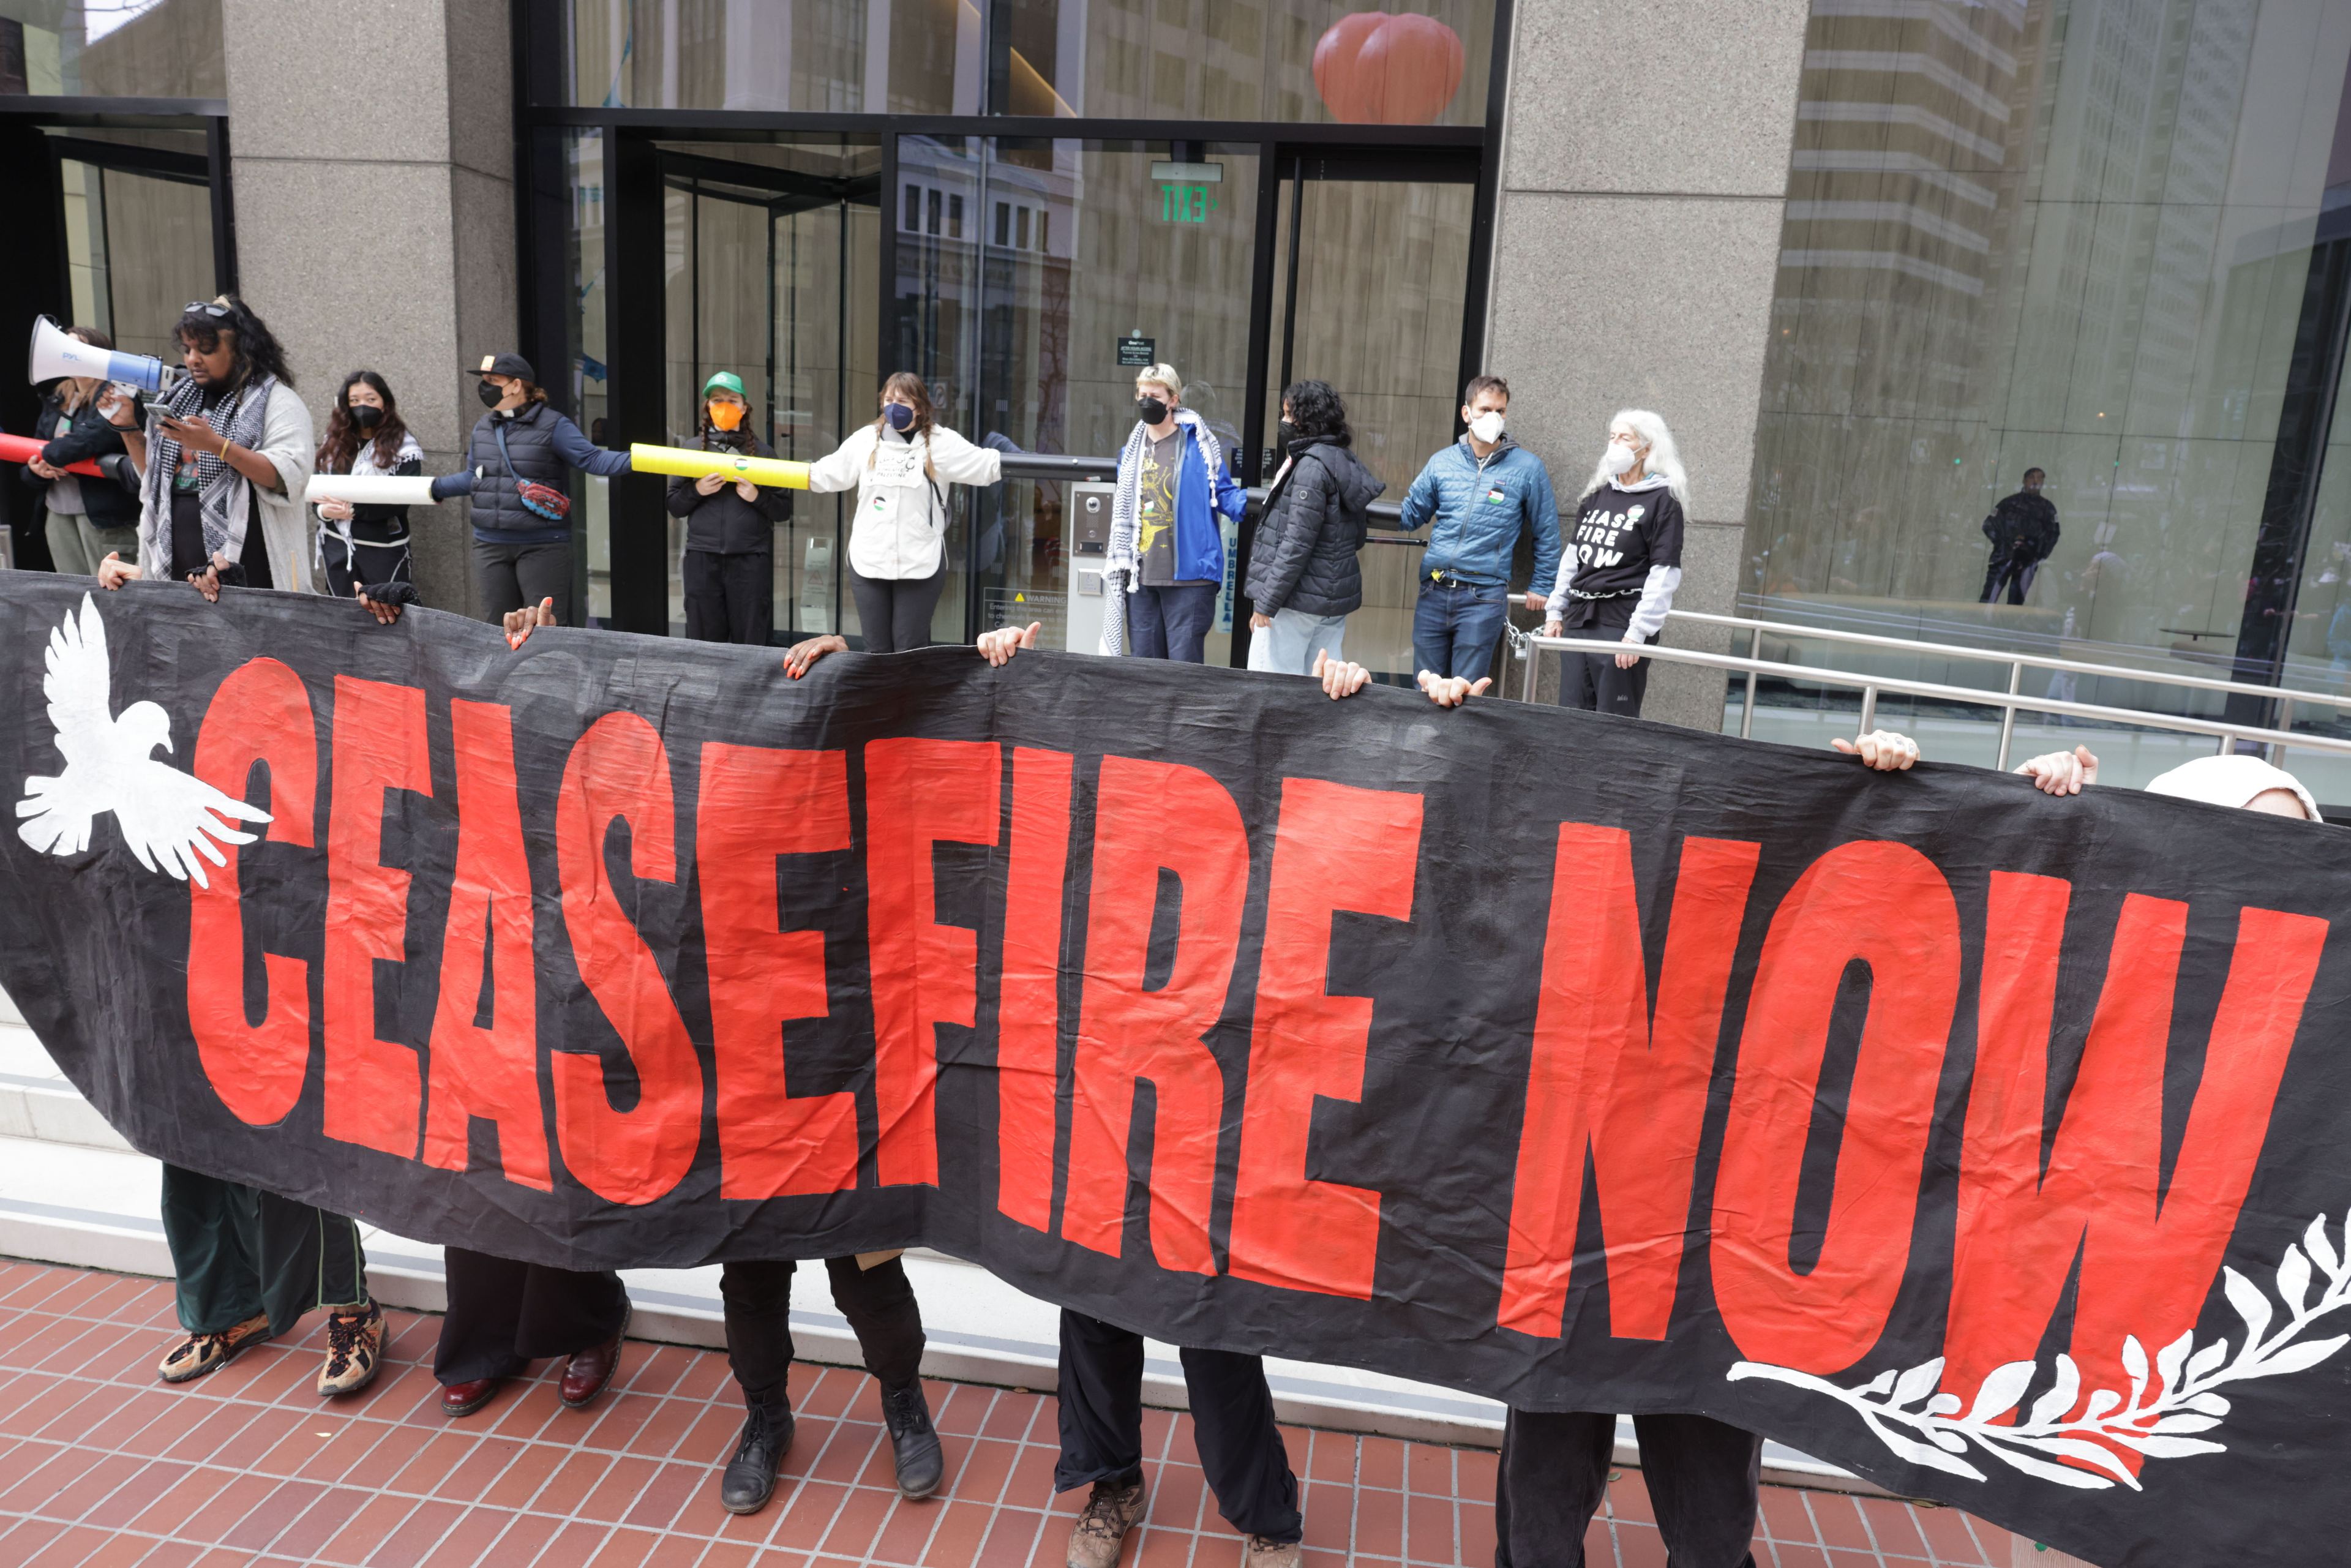 Protesters hold a black banner with red lettering outside a downtown building.